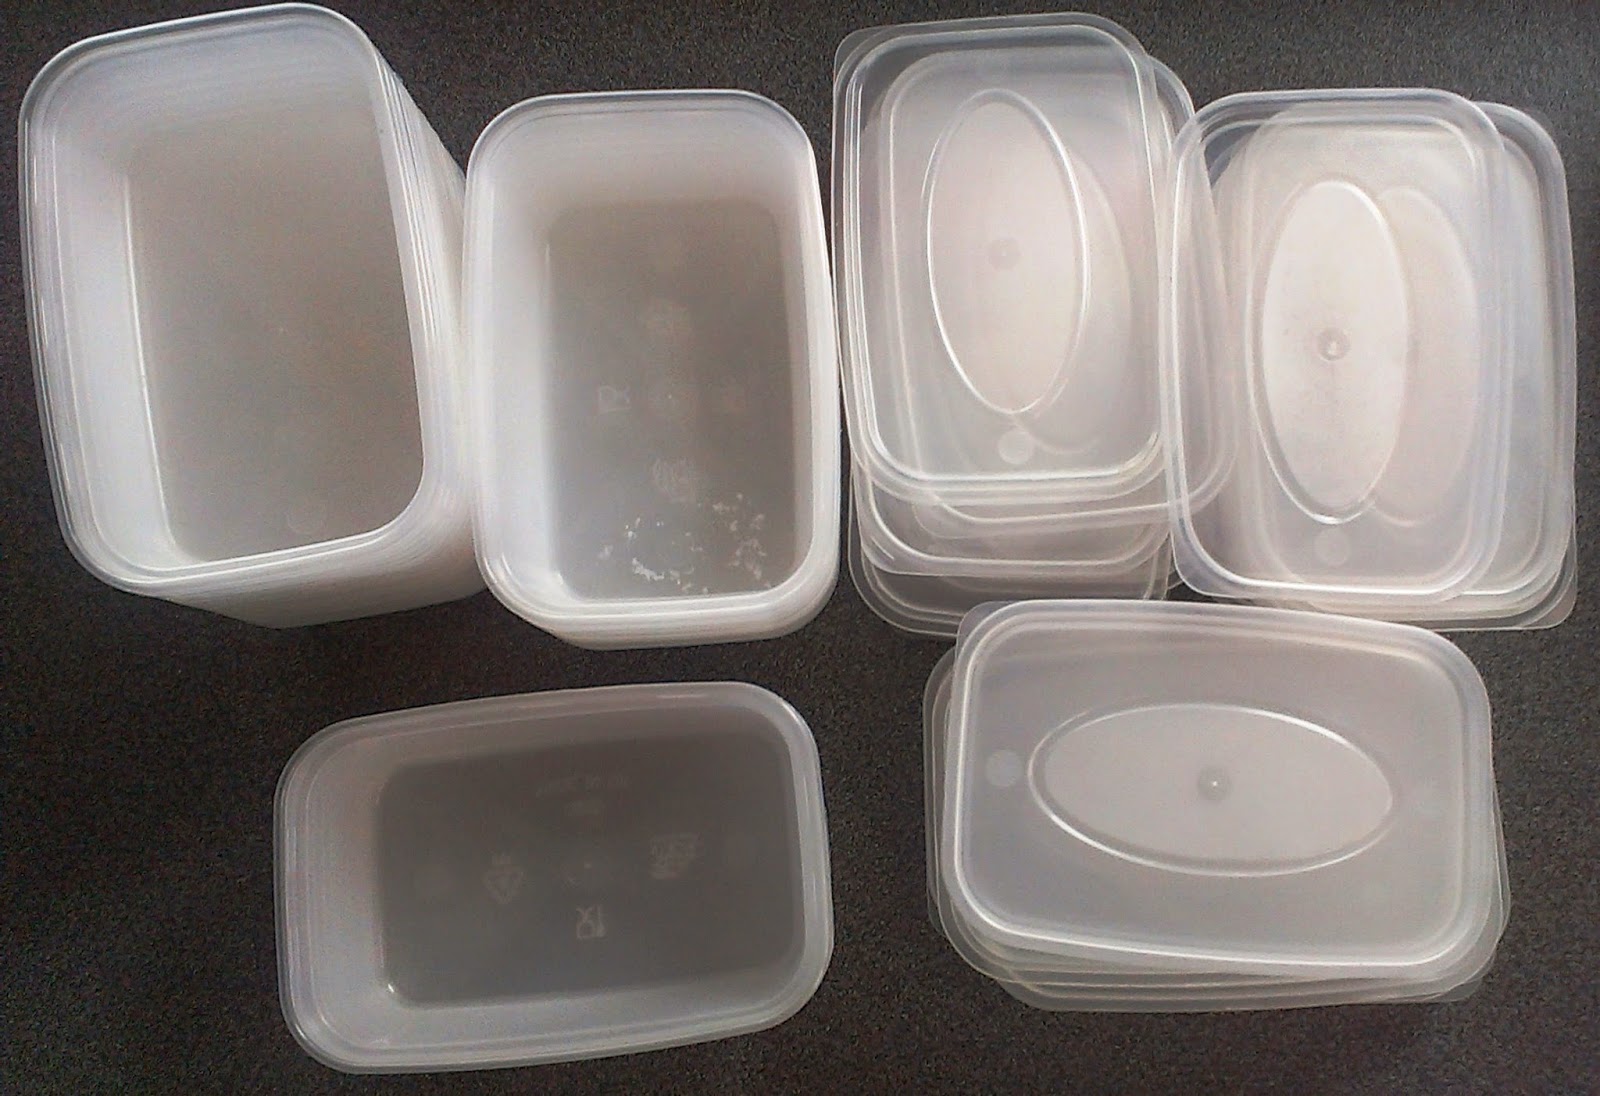 Chinese Takeaway Boxes